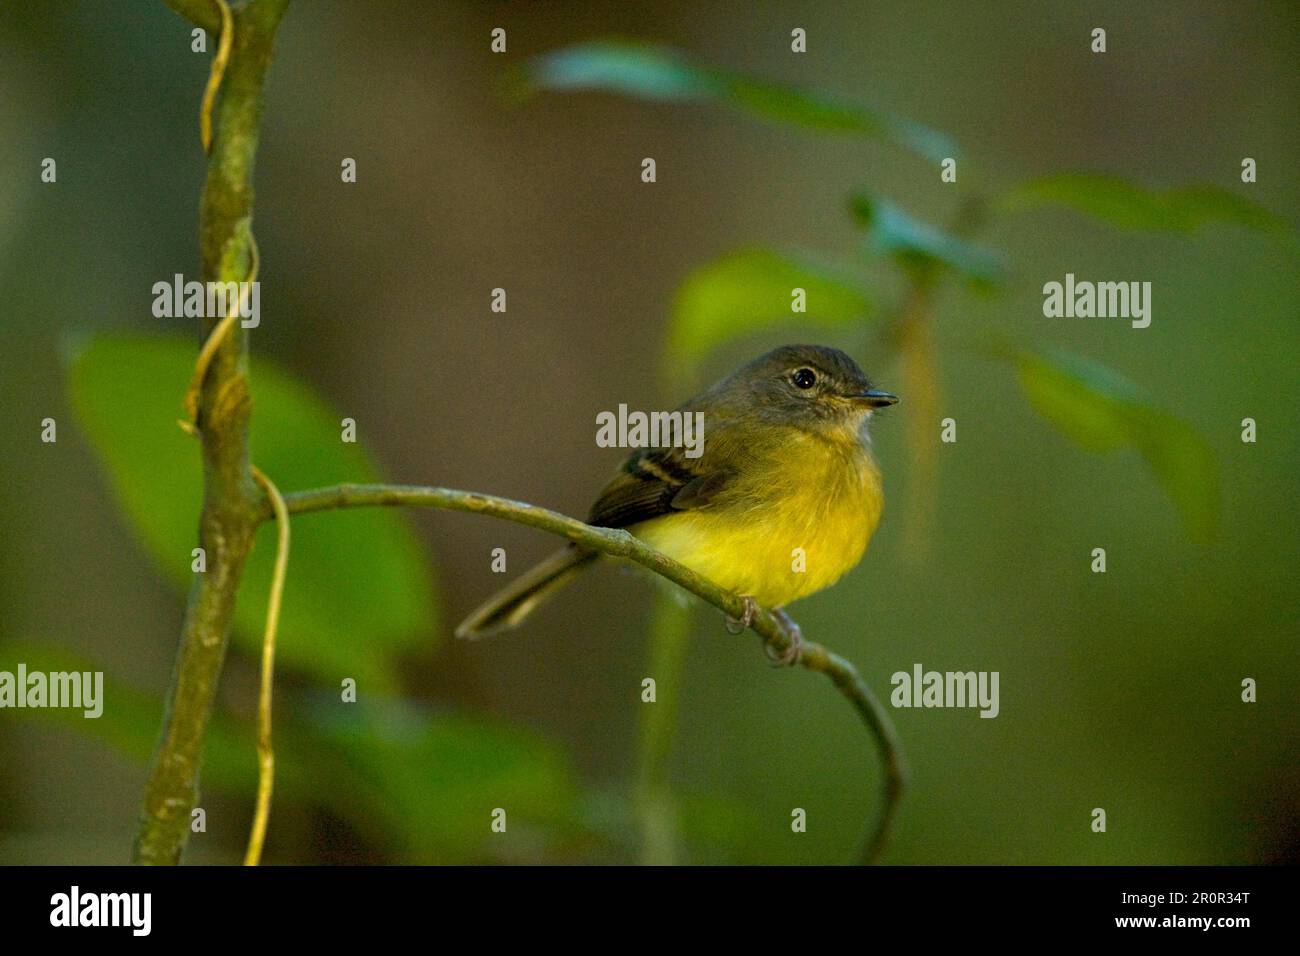 Tawny-chested Flycatcher (Aphanotriccus capitalis) adult, perched on twig, Costa Rica Stock Photo